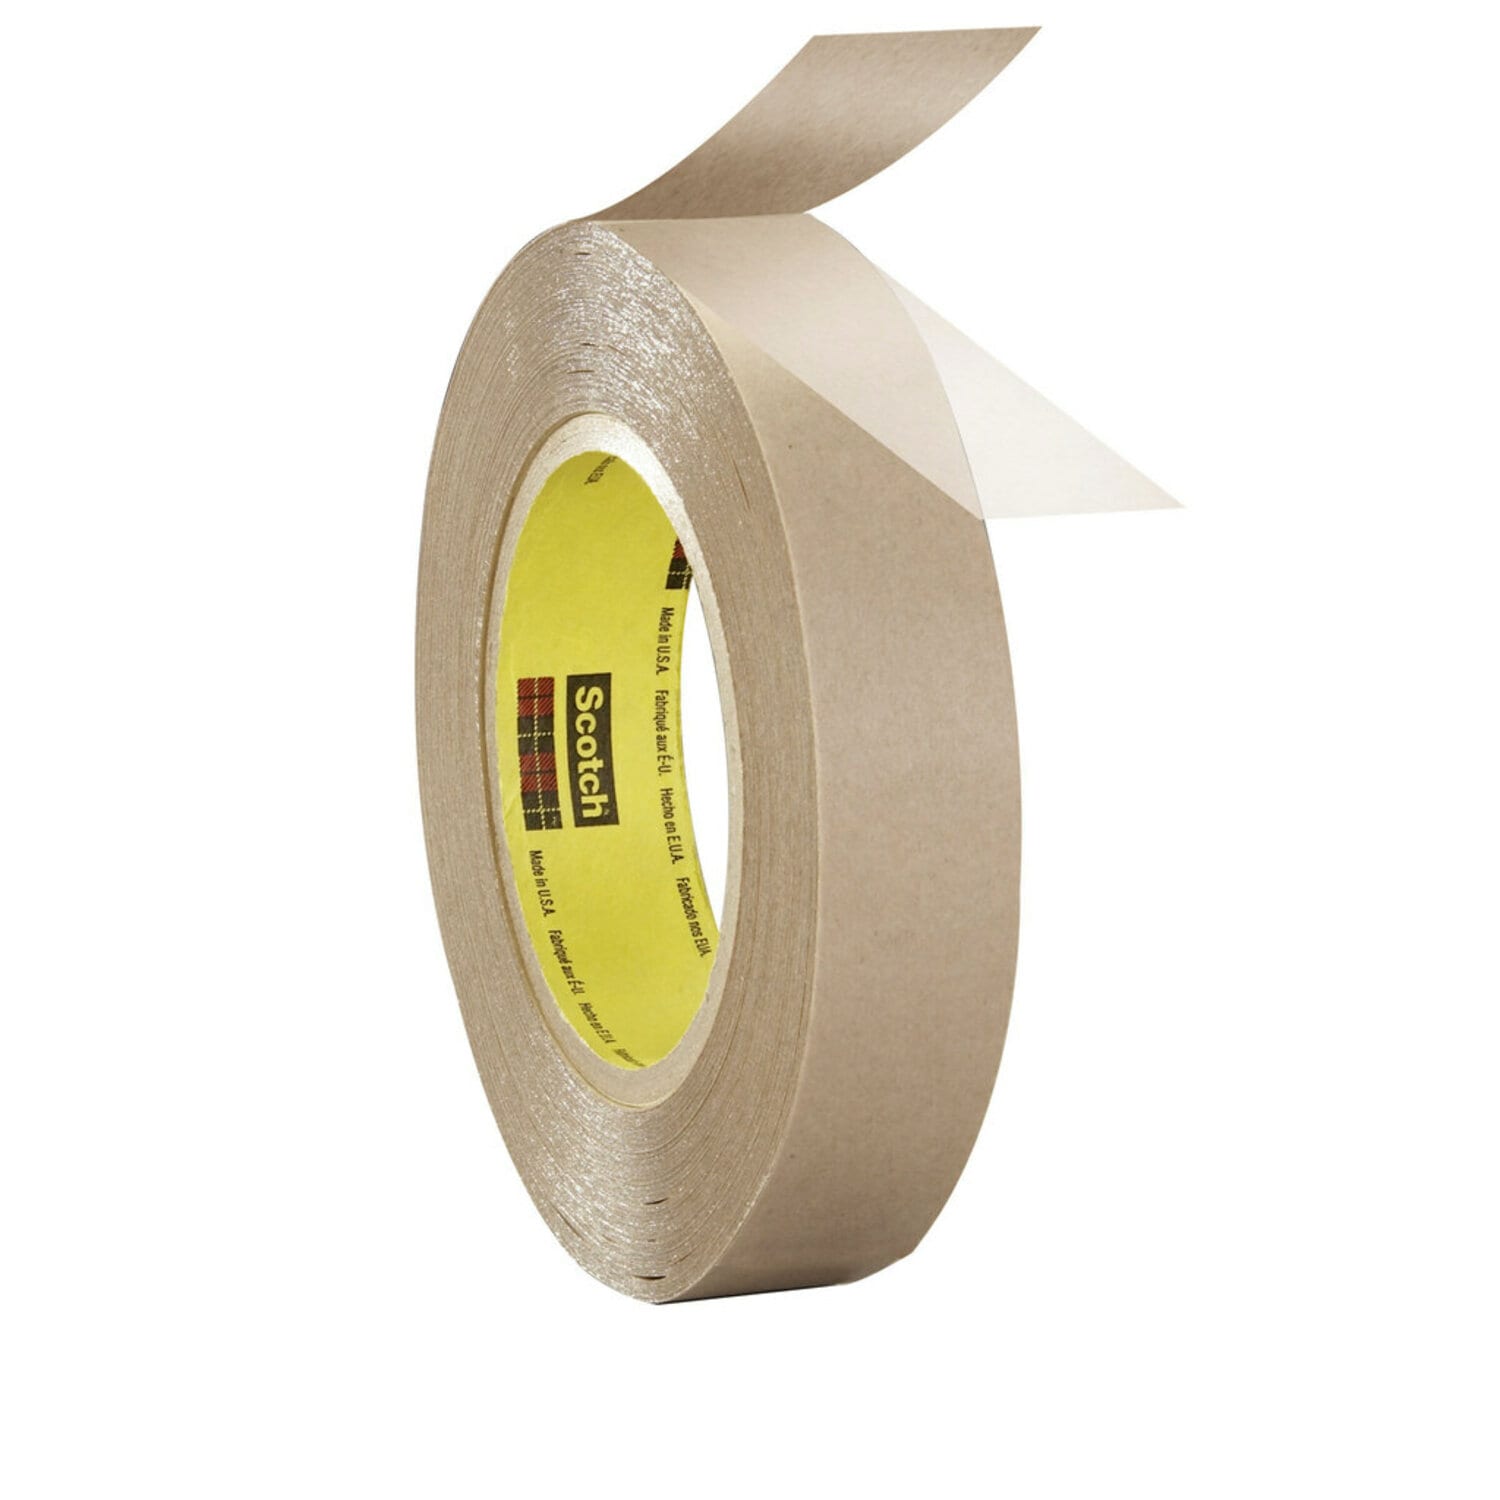 7100308765 - 3M Double Coated Tape 9832HL+, Clear, 4.8 mil, Roll, Config